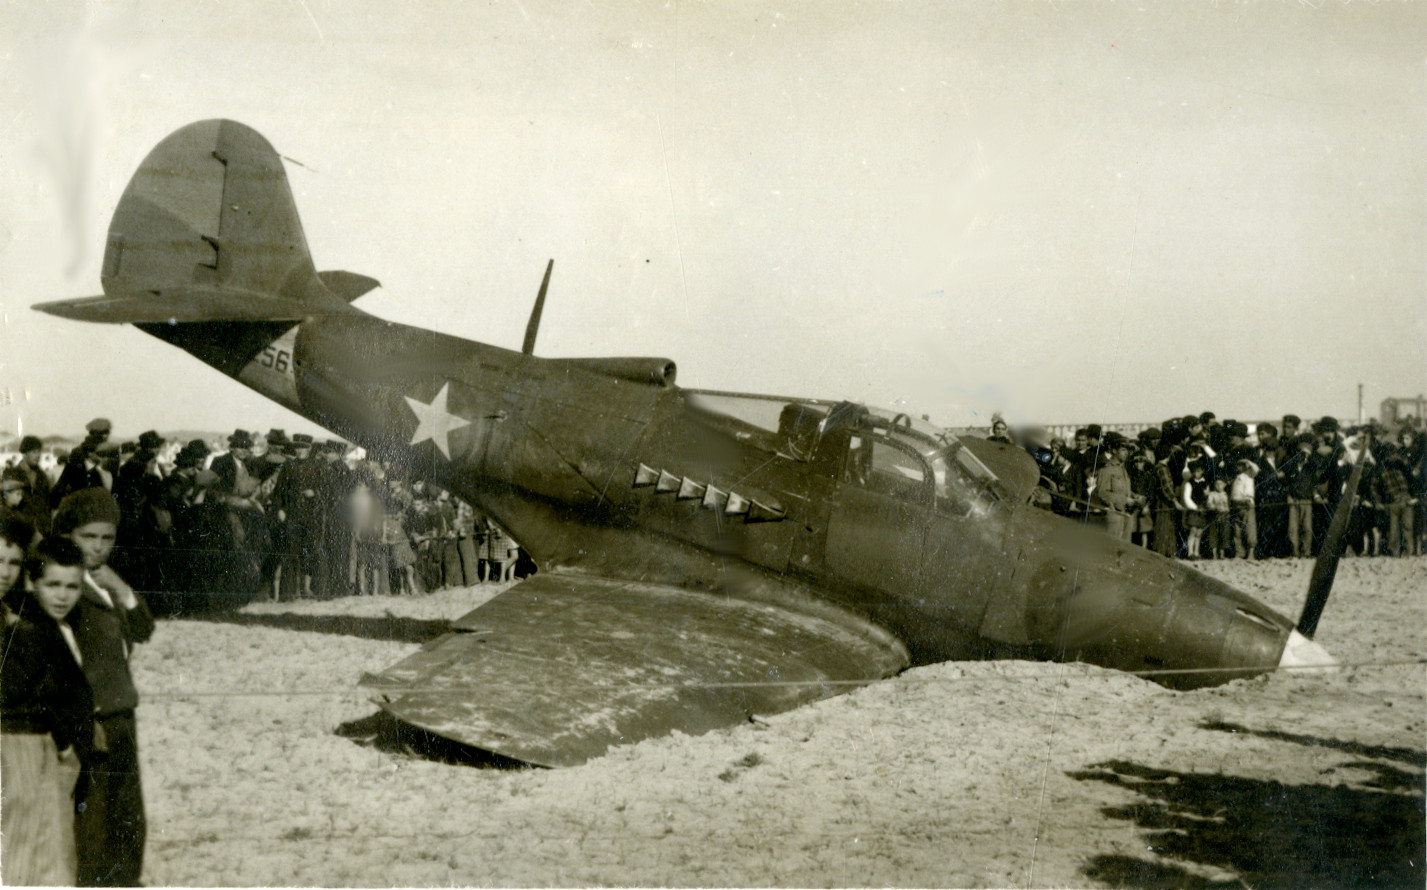 The Aircobra in Vila do Conde after the Forced Landing